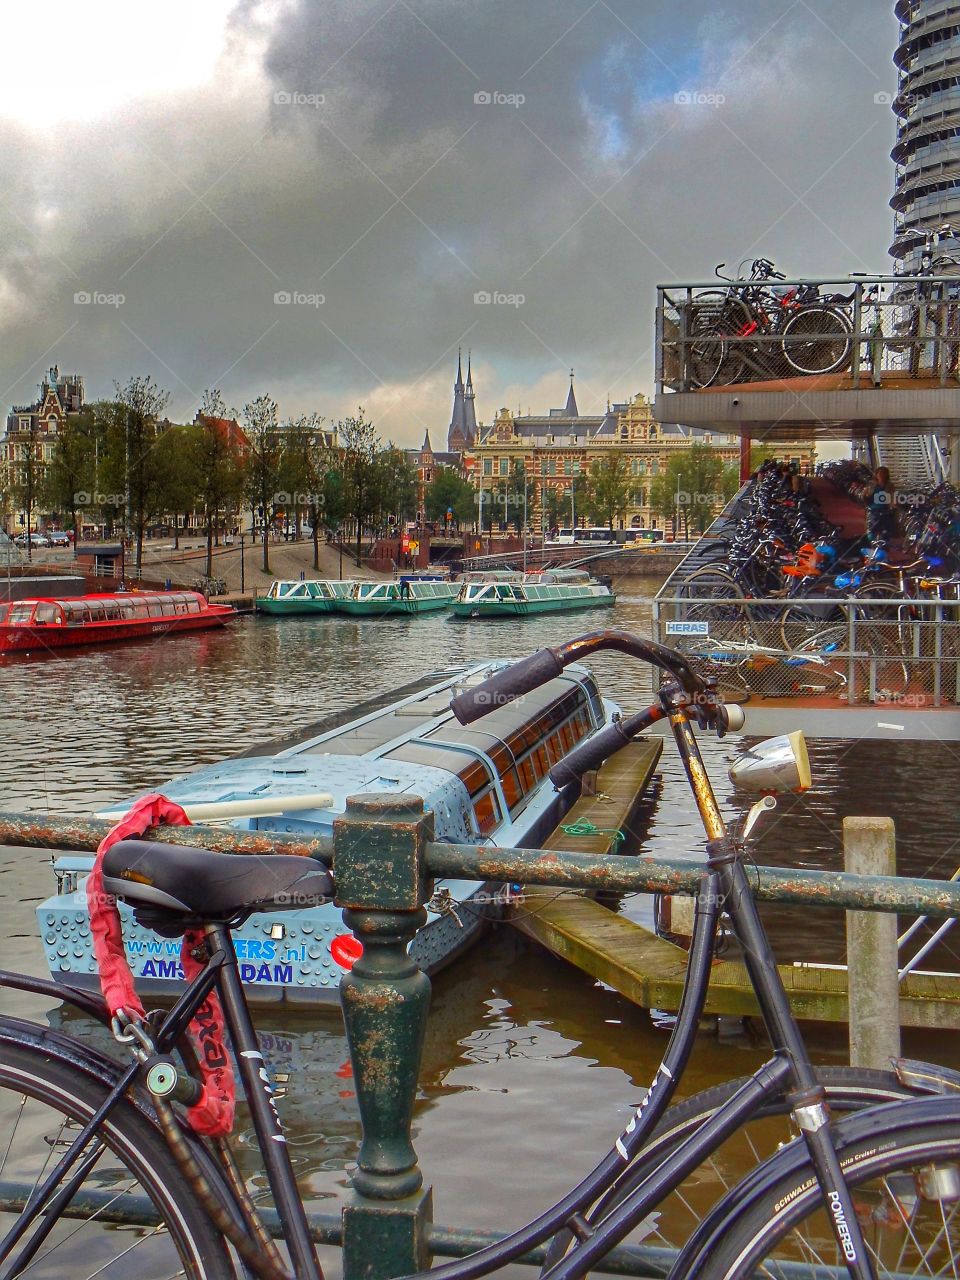 multi-story bicycle parking in Amsterdam ... capital of boats and bicycles